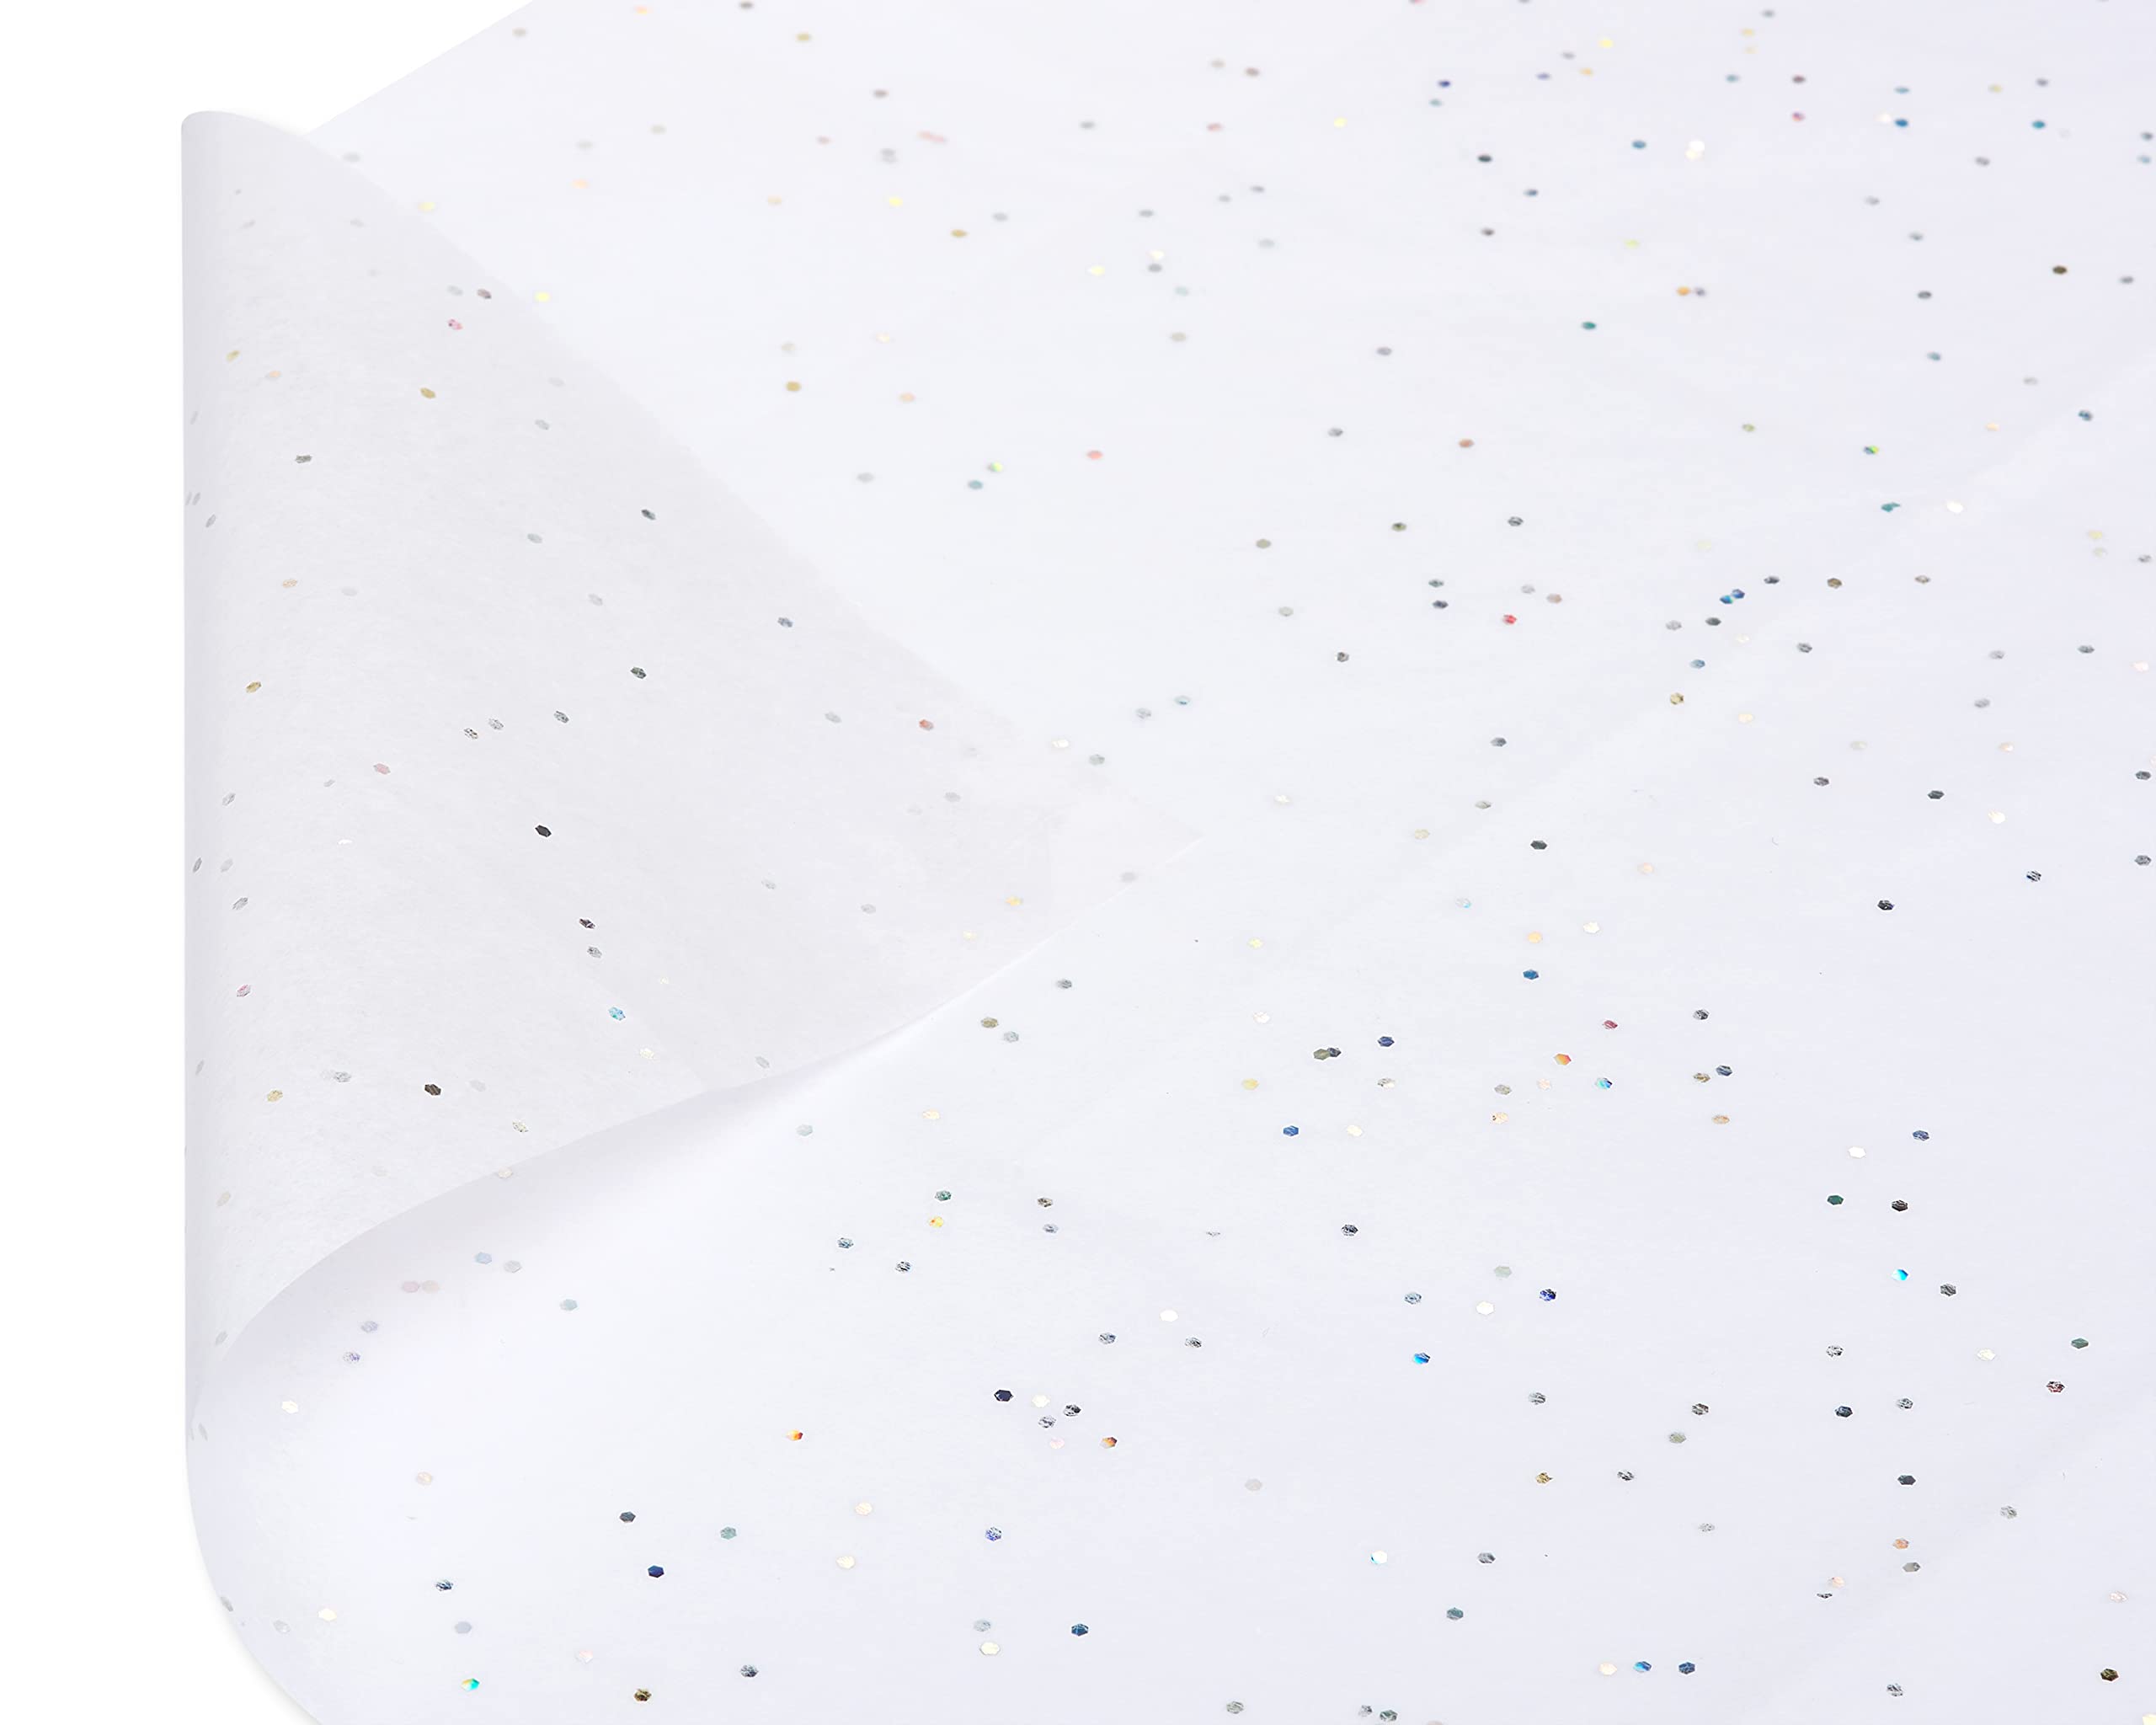 Papyrus 4 Sheet White Tissue Paper with Iridescent Fleks for Gifts, Decorations, Crafts, DIY and More